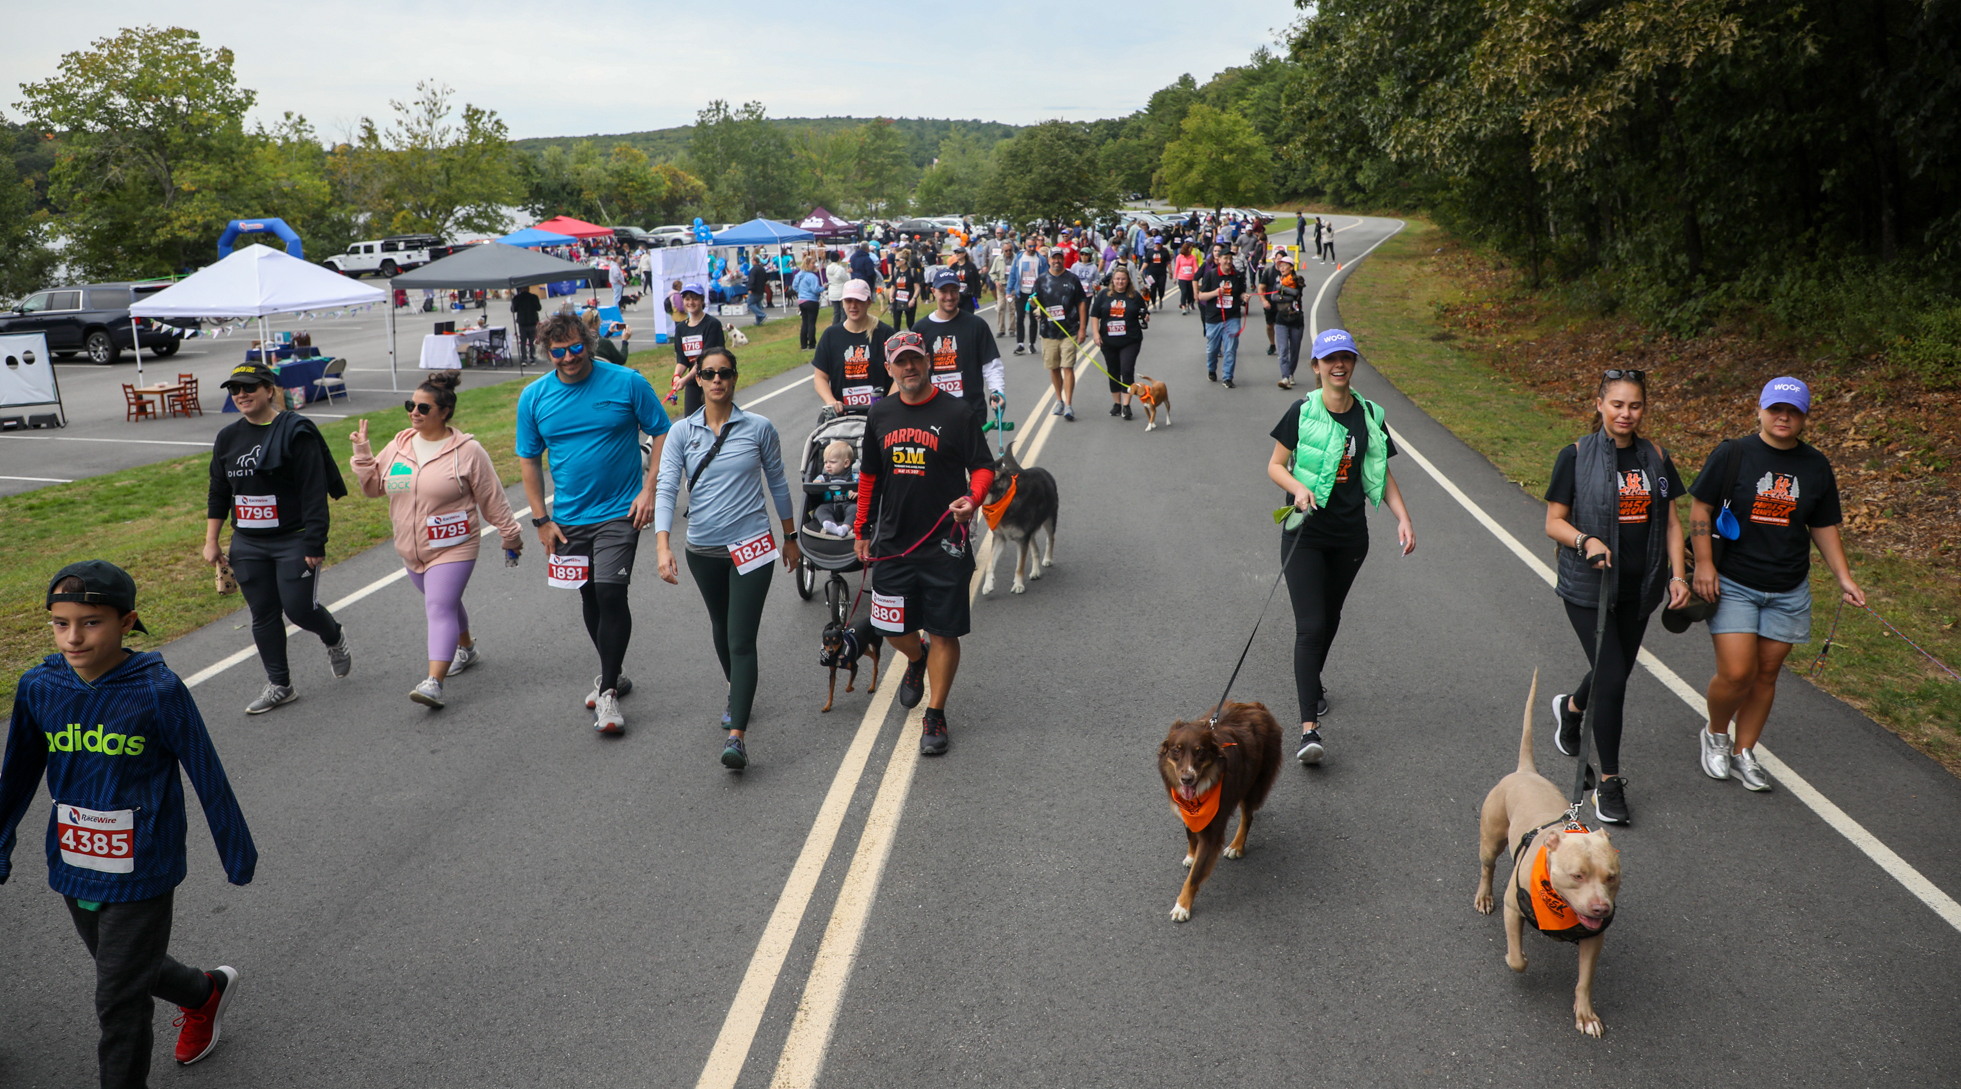 Photos: Paws & Claws 5K at Hopkinton State Park